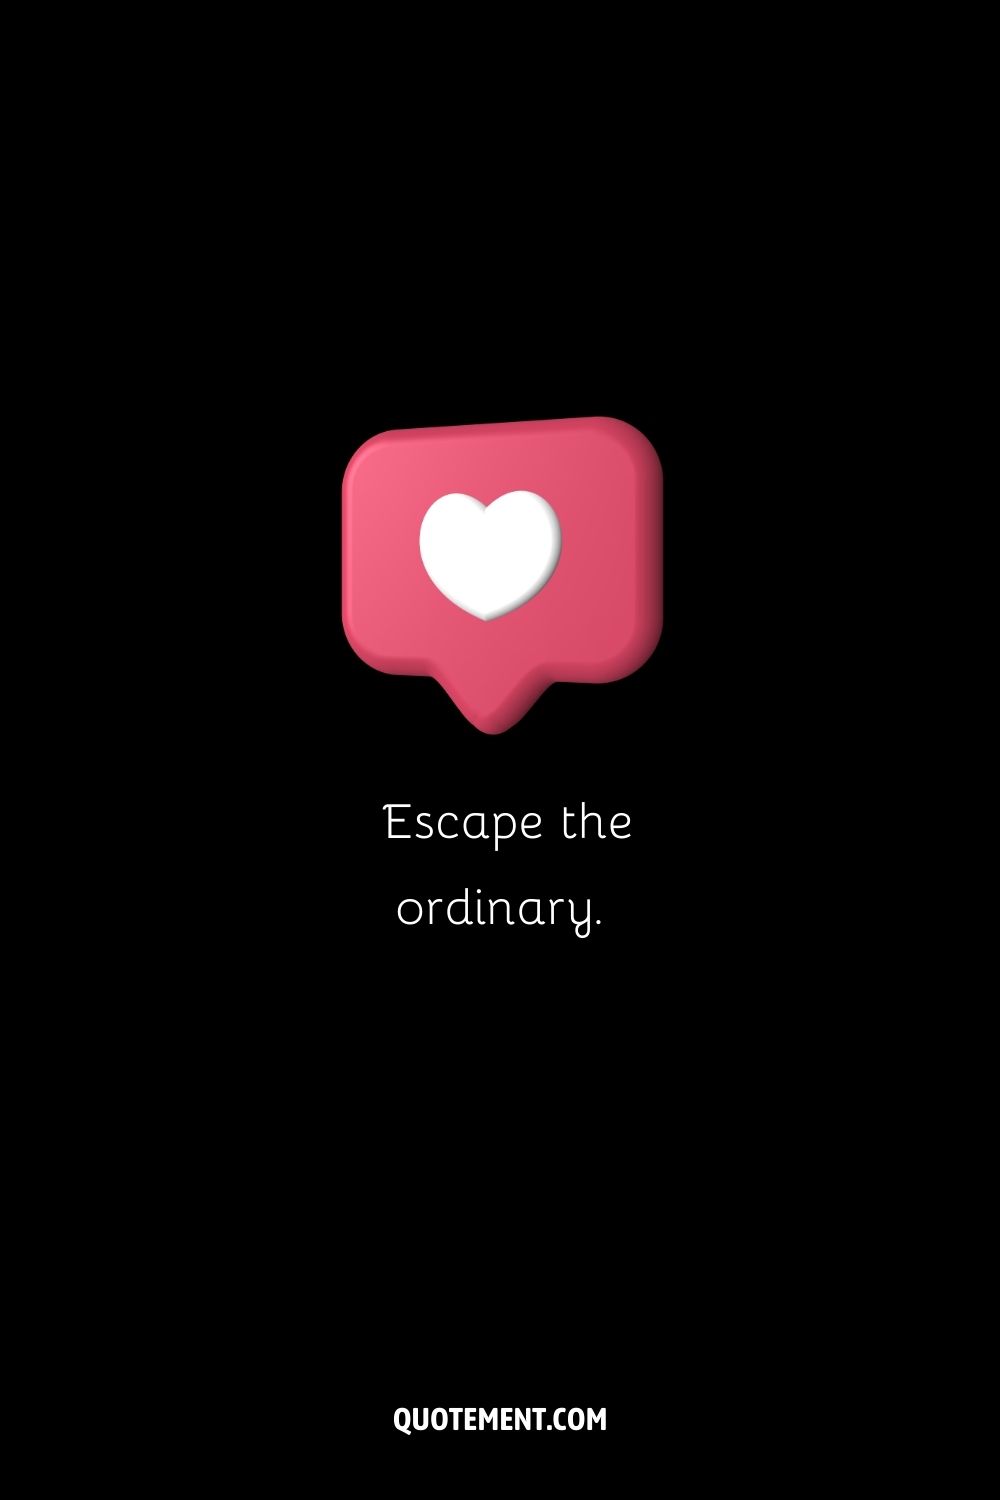 Short and cute caption idea for Ig represented by a pink notification